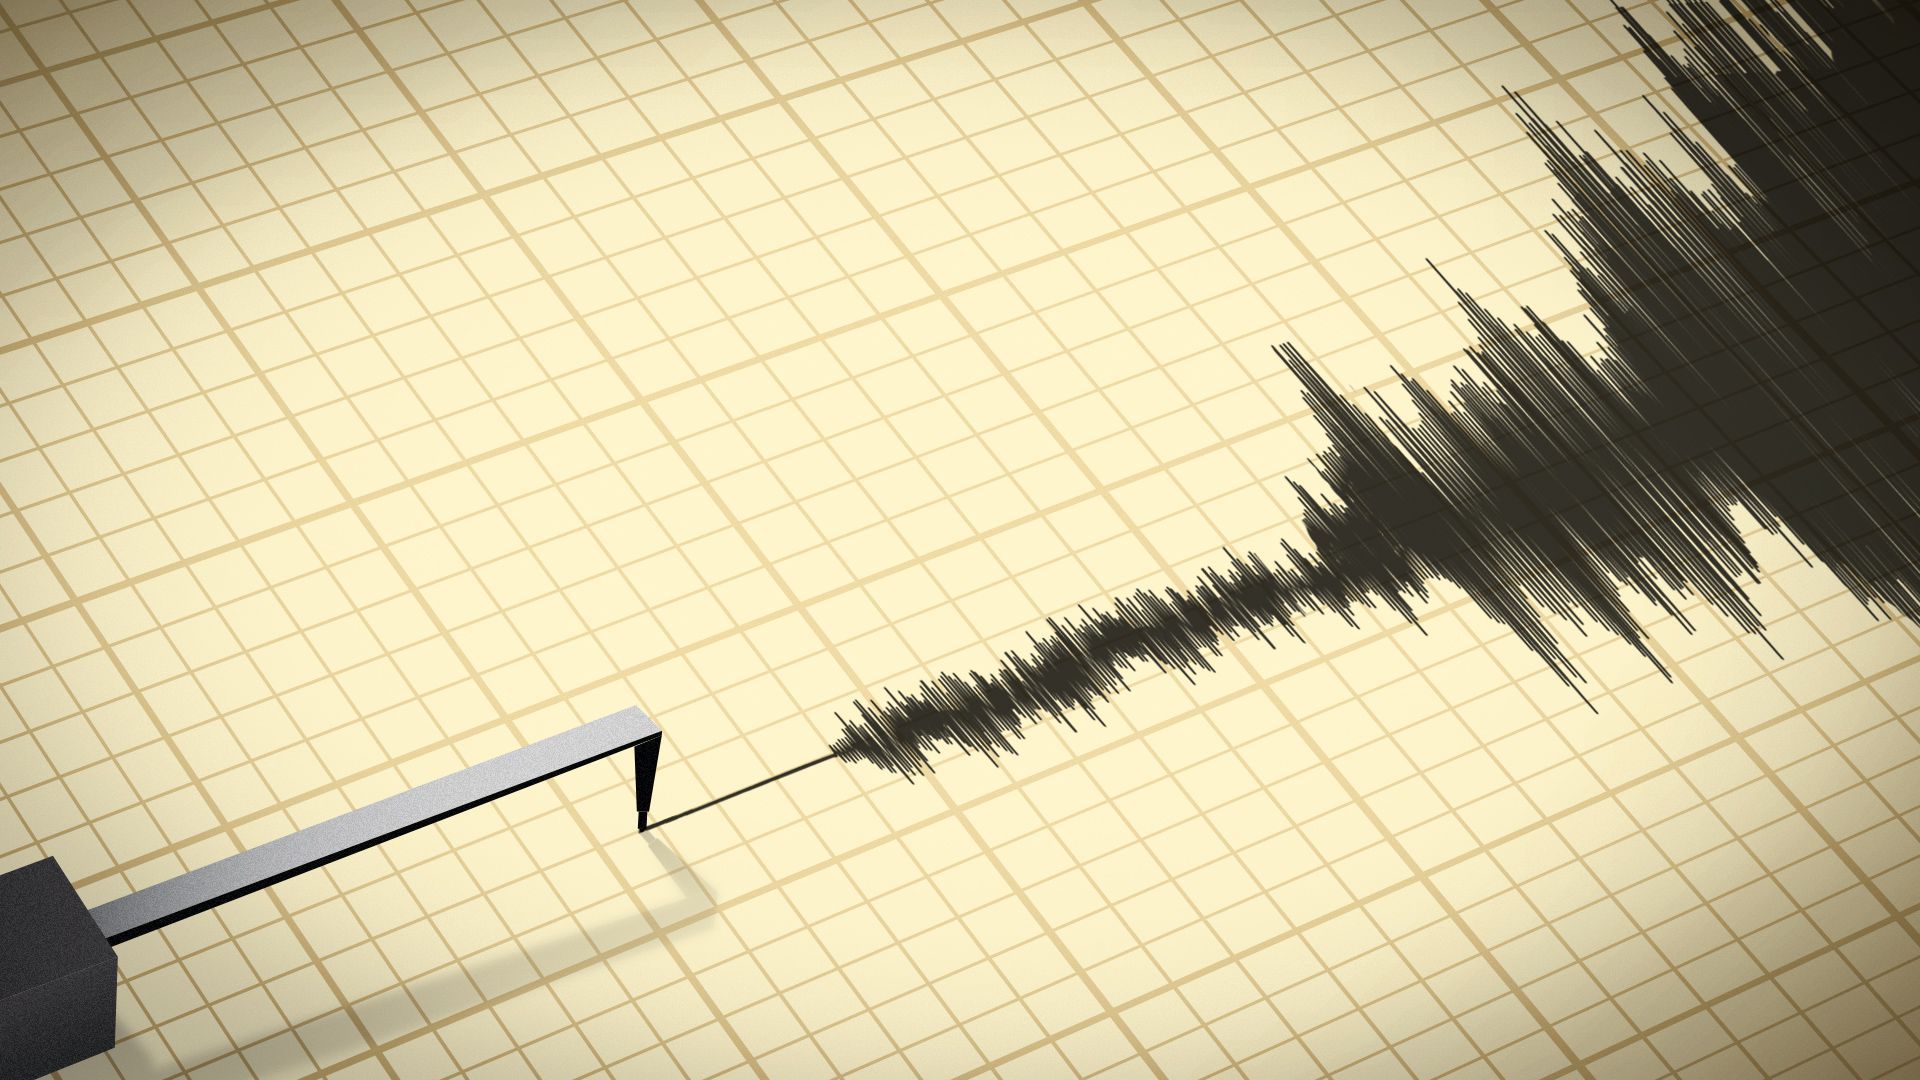 Illustration of a seismometer with the measurements going from incredibly strong to almost nonexistent. 